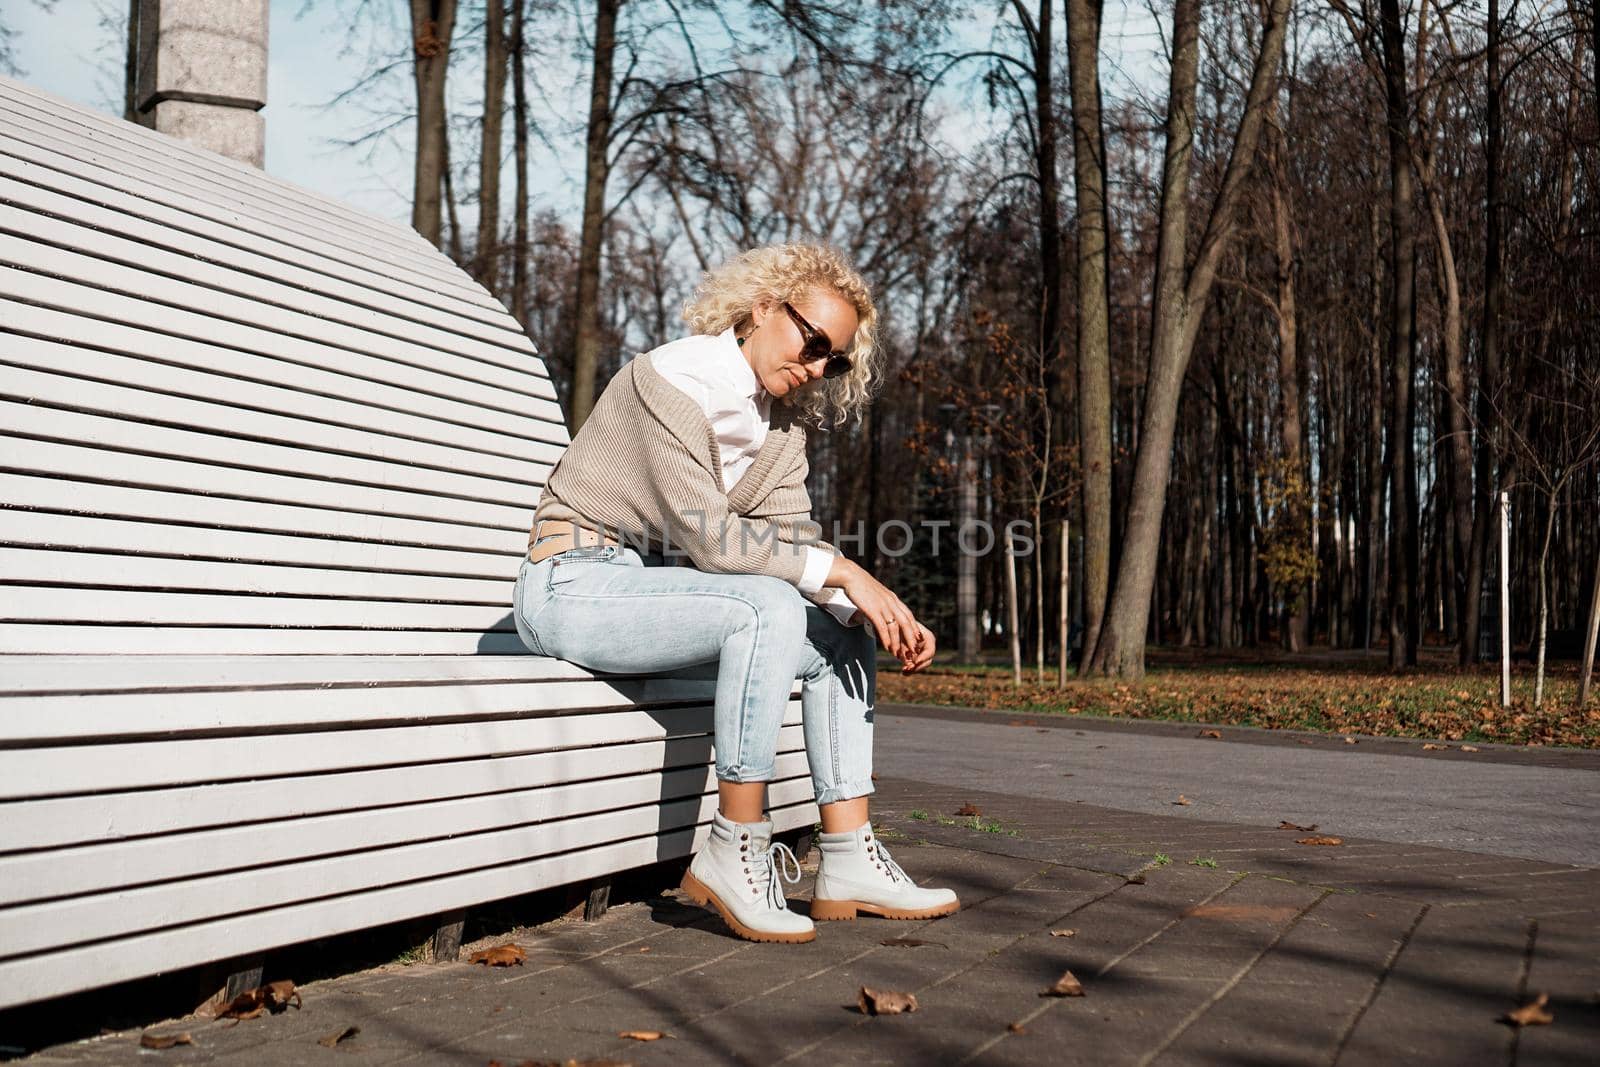 Pretty woman in sunglasses on bench at autumn park alone, lifestyle people concept